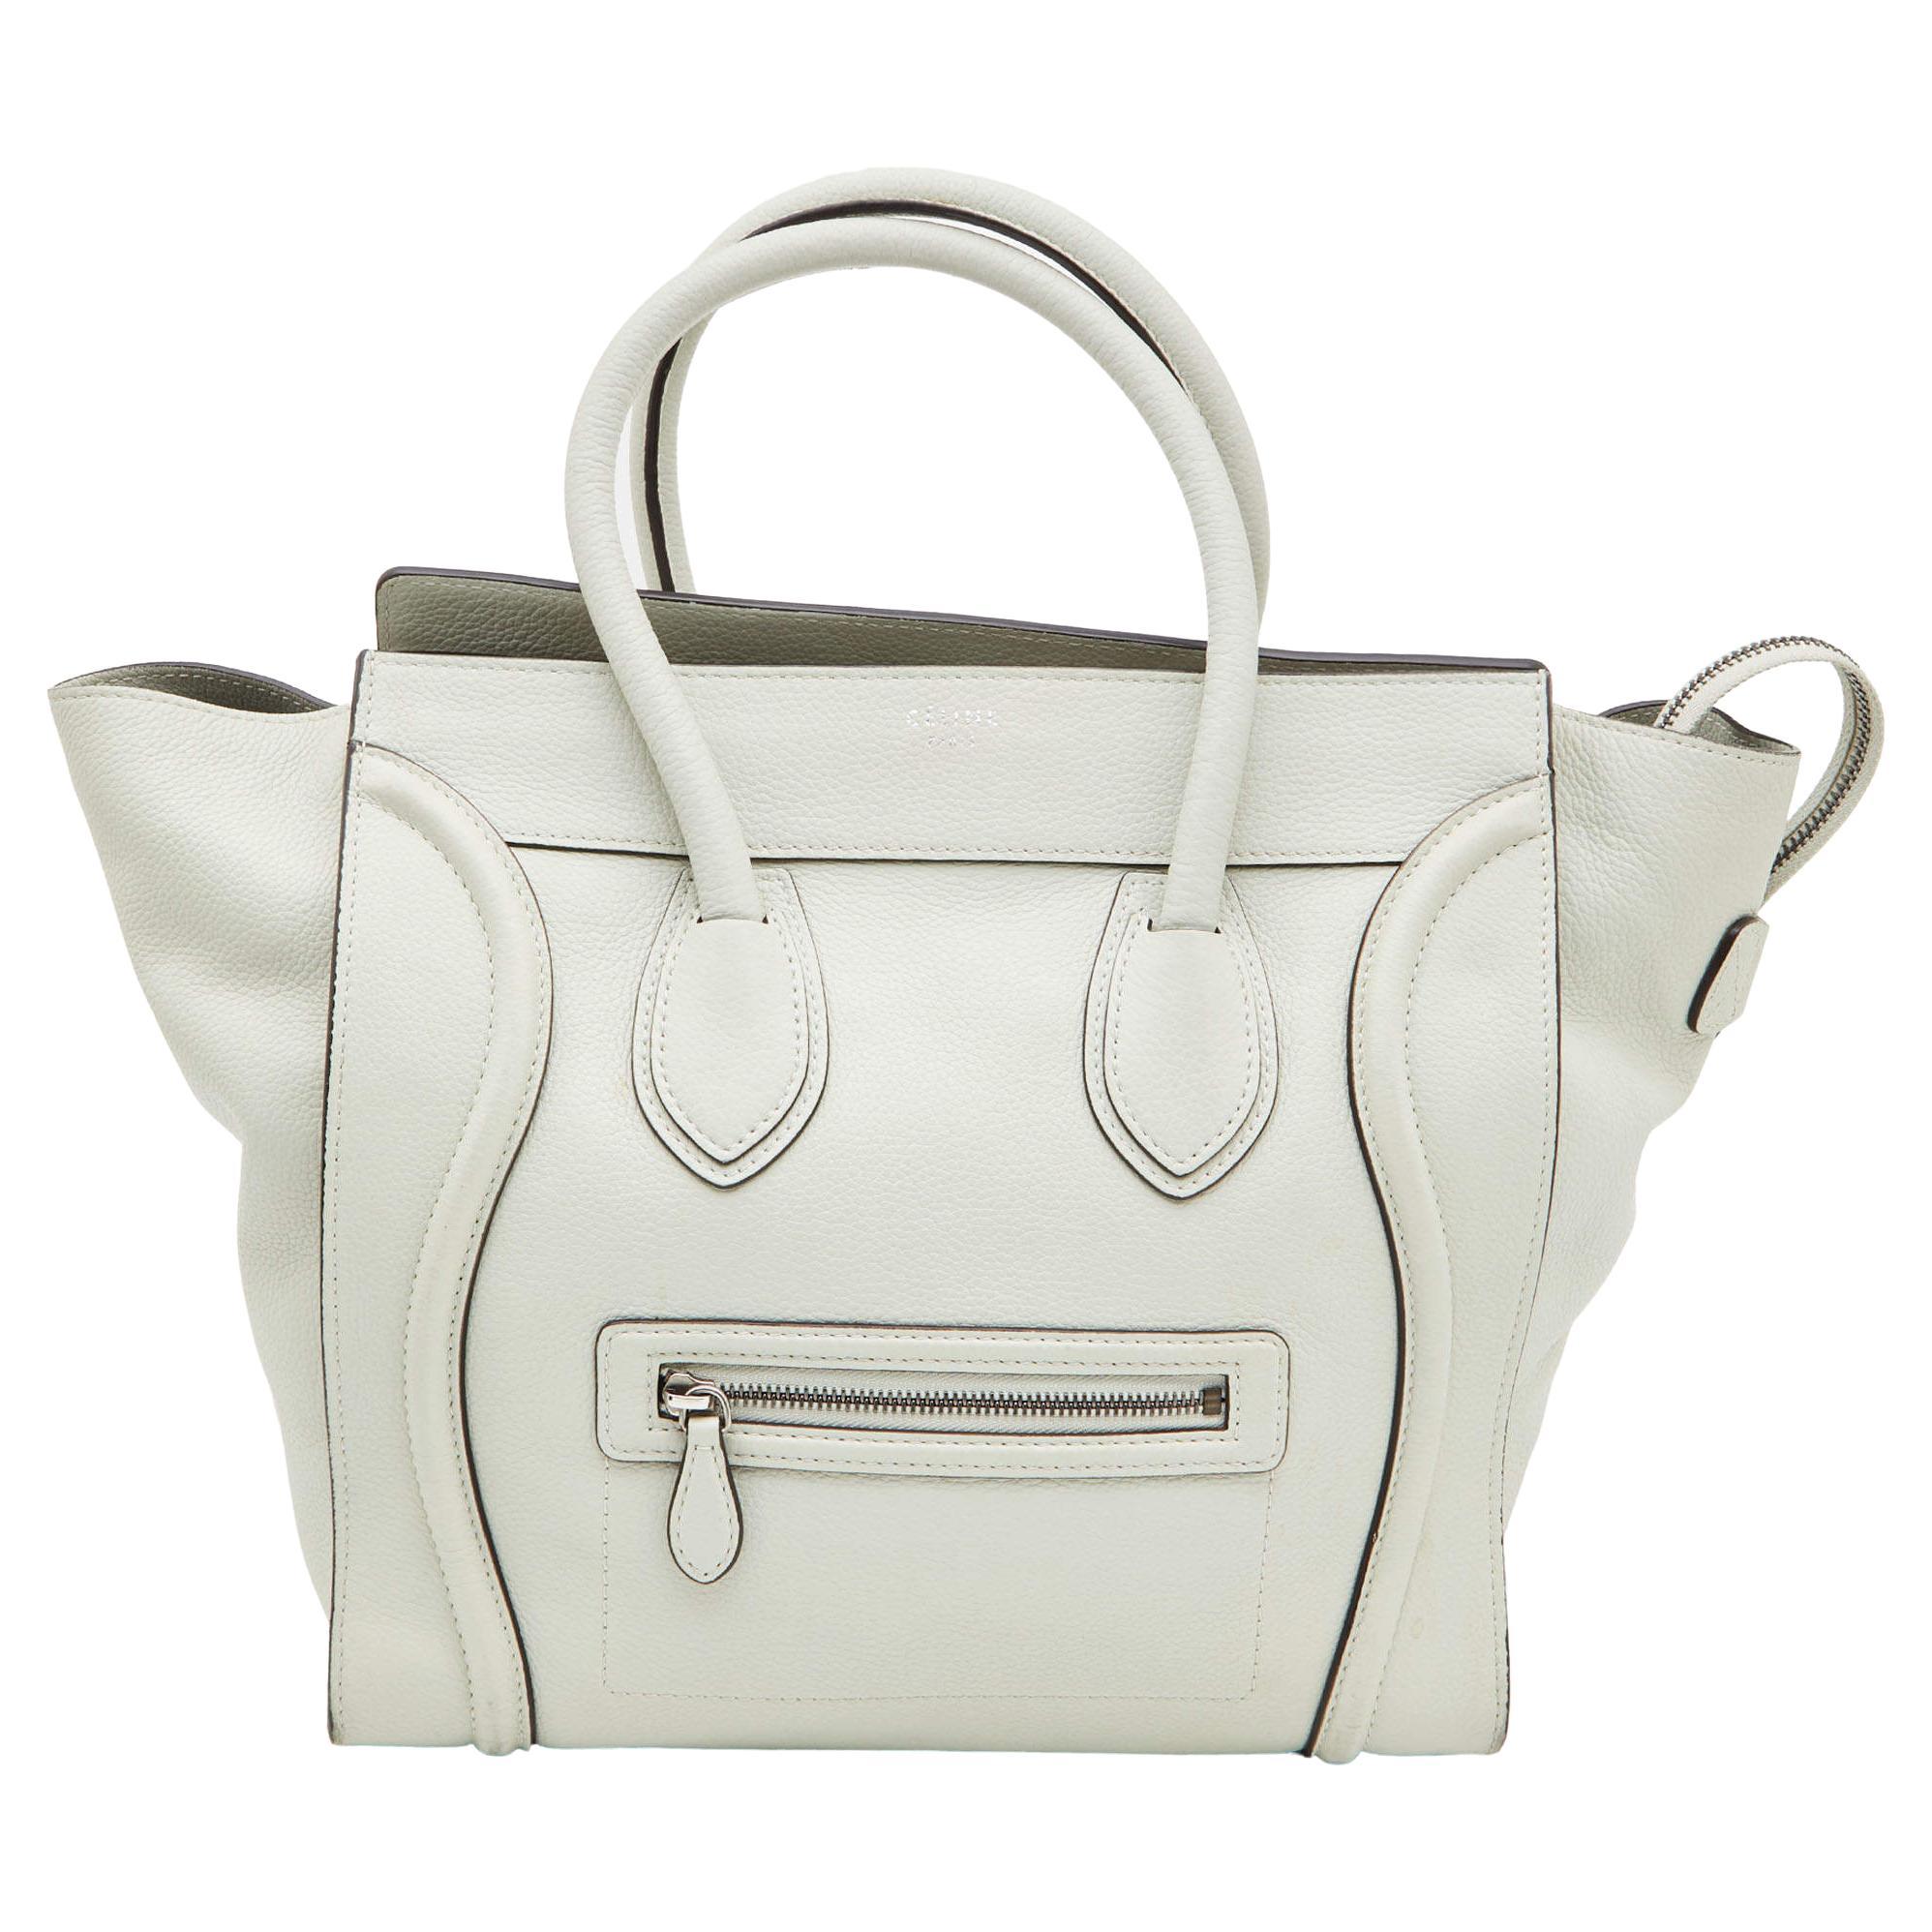 Introducing you to a new bag obsession: Monogram Trapeze Bag. This